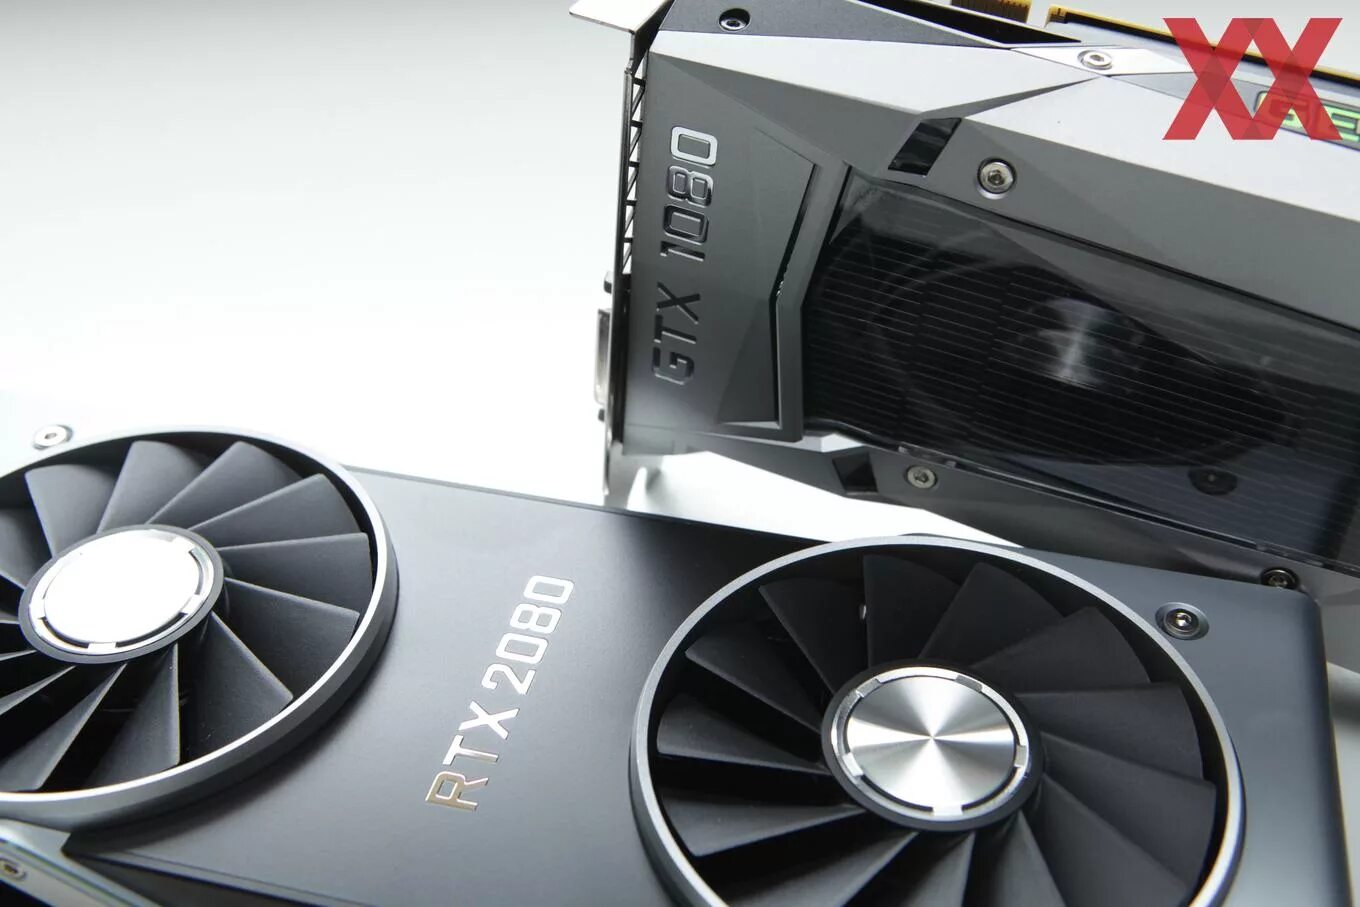 3070 founders edition. GEFORCE GTX 2080 ti. RTX 3070 ti founders Edition. RTX 2080 ti founders Edition. Видеокарта RTX 2080 super founders Edition.